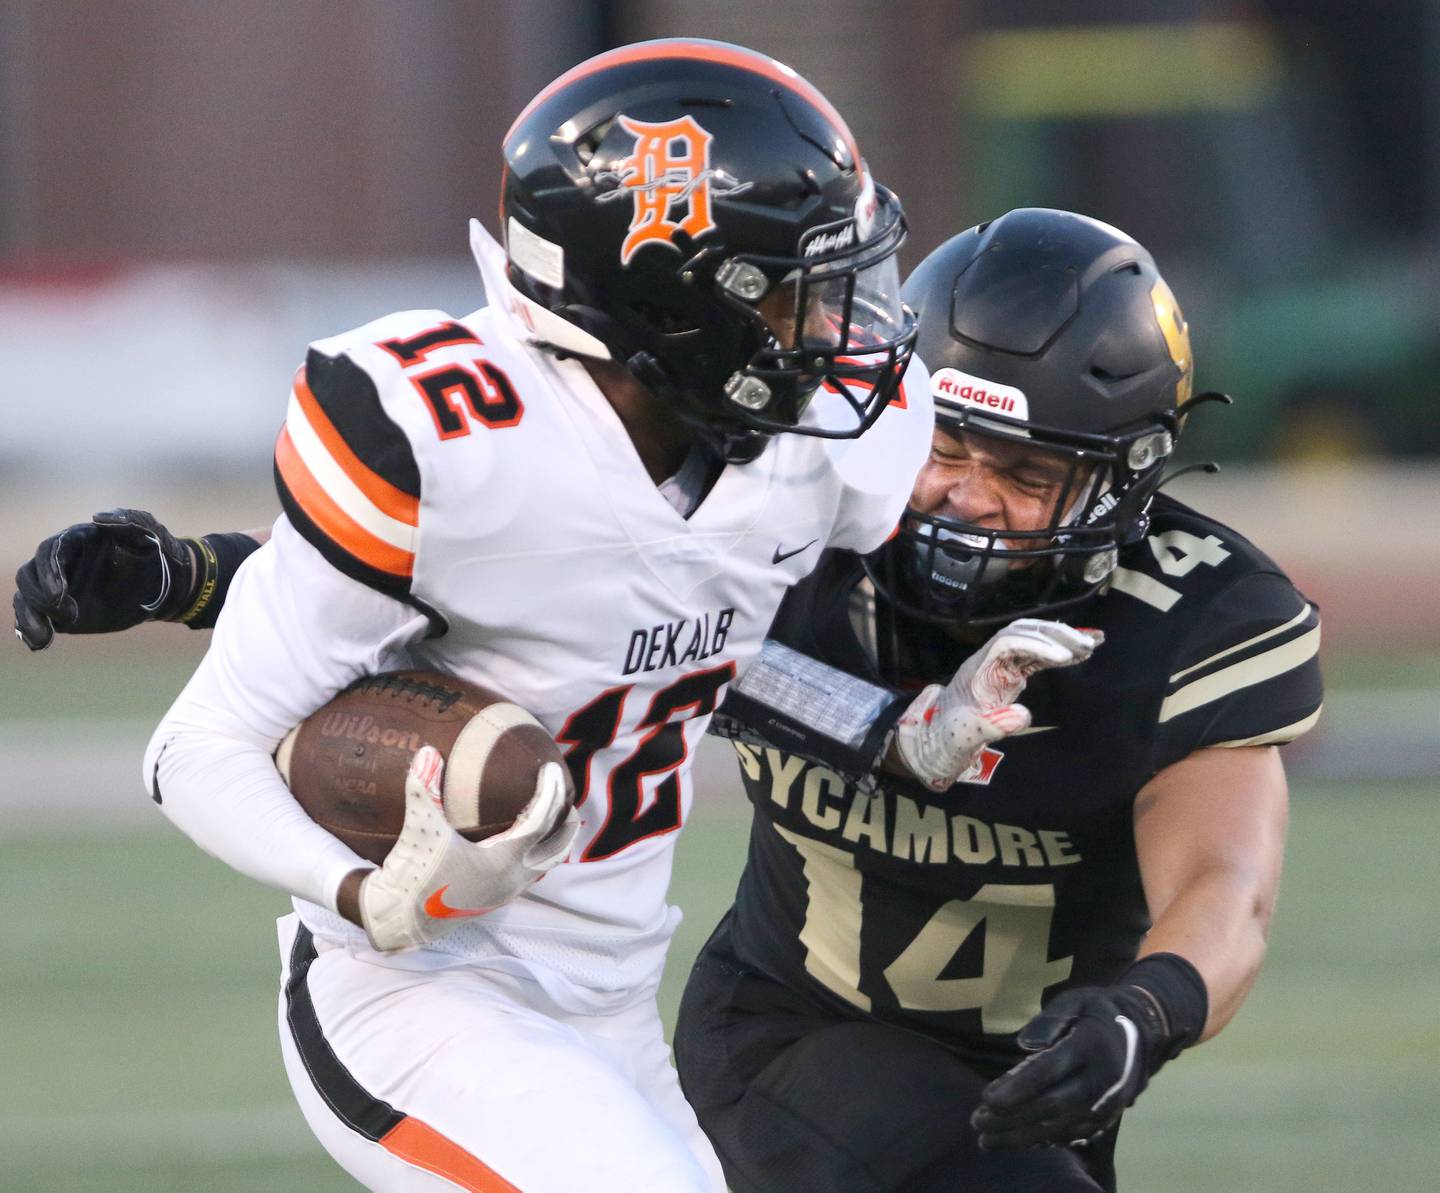 DeKalb wide receiver Ethan McCarter tries to fend of Sycamore's Kiefer Tarnoki Friday Aug. 27, 2021, during the First National Challenge in Huskie Stadium at Northern Illinois University in DeKalb. Friday was the first game of the 2021 season for both schools.